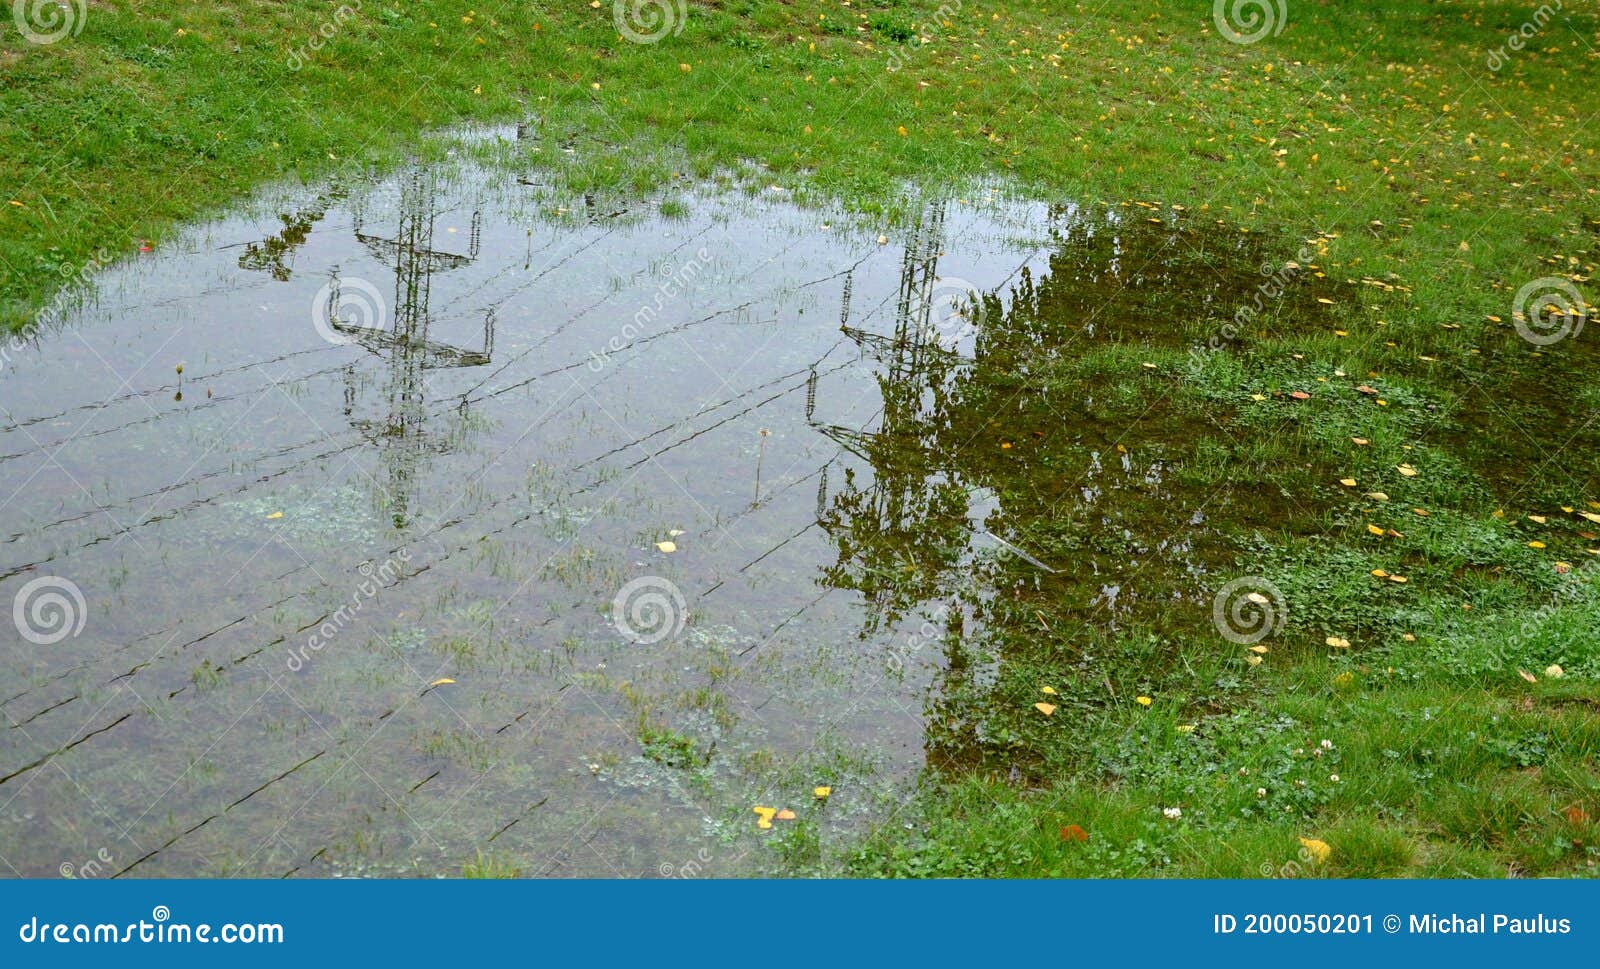 too compact and impermeable soil does not absorb water during rains and floods. a lake was created in the park in the lawn, which